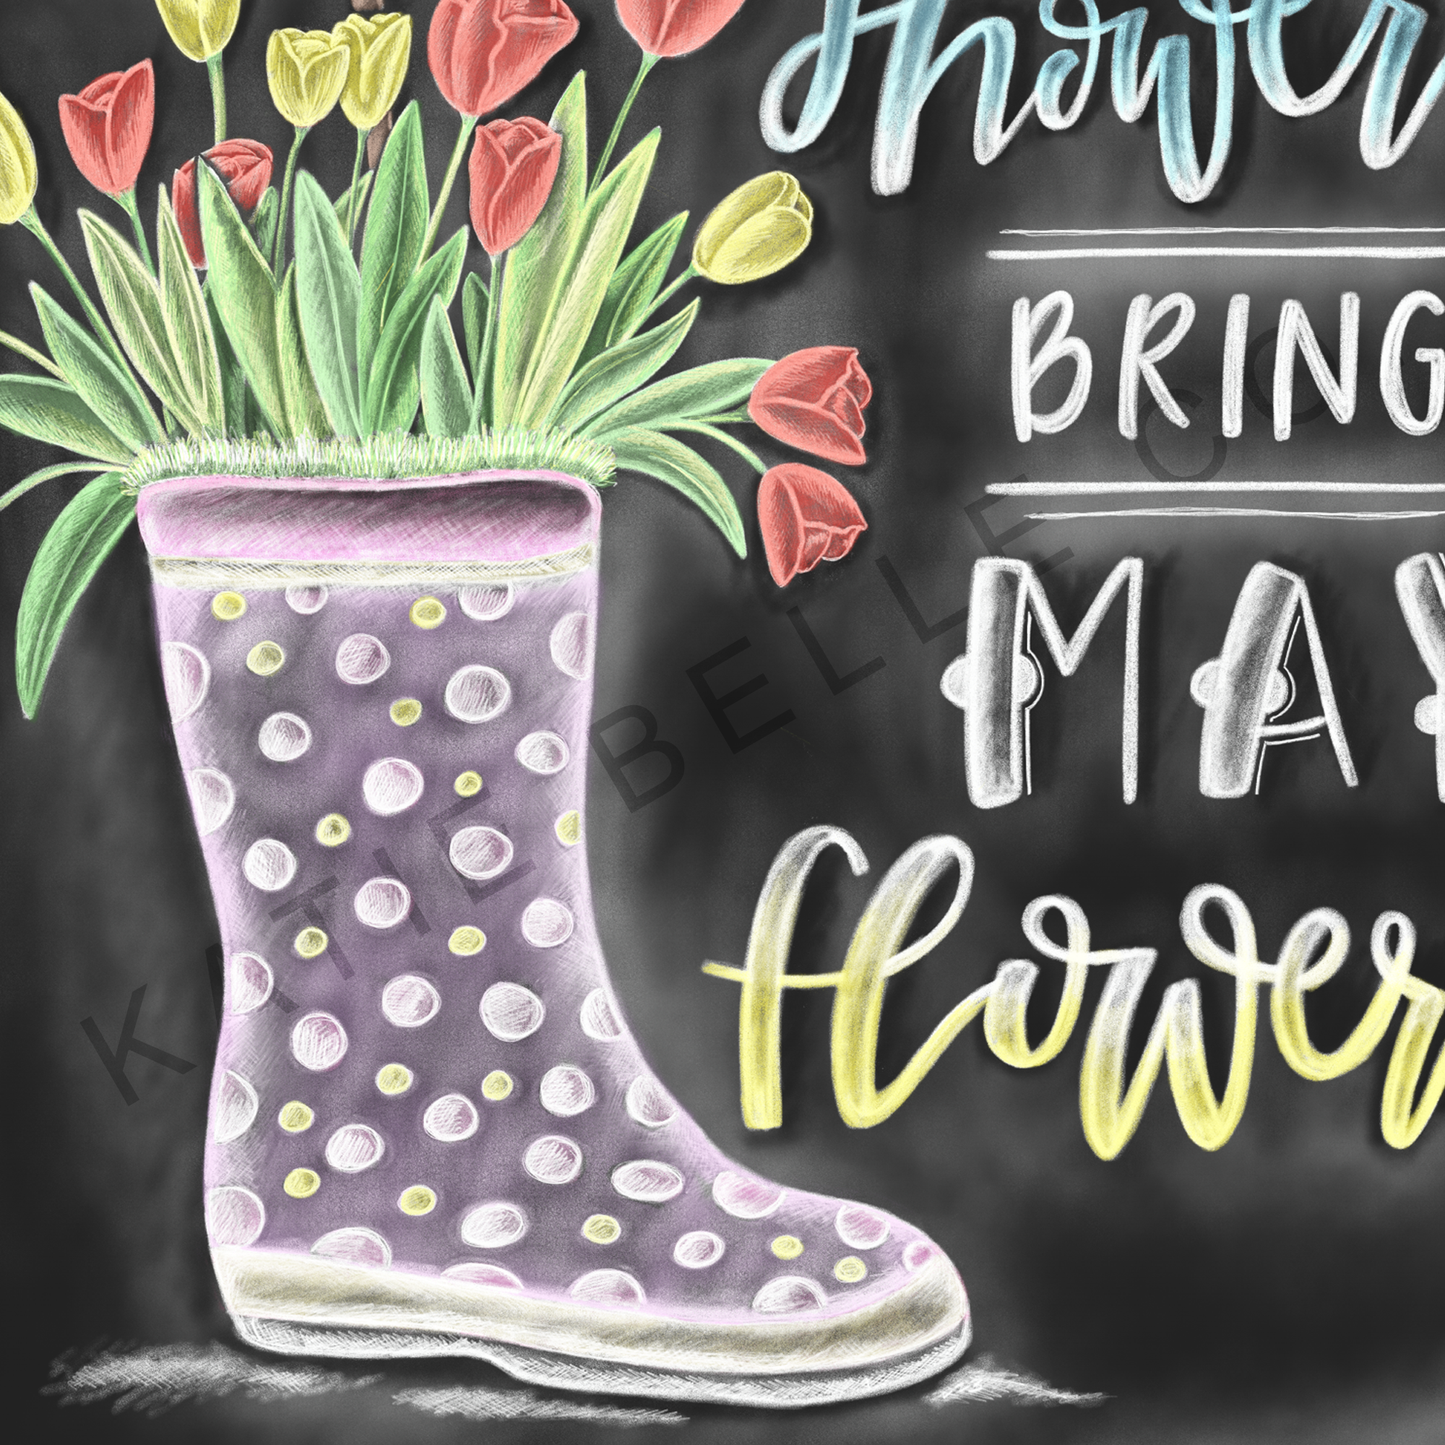 april showers bring may flowers. easter gift. easter decor. easter basket. spring decor. spring artwork. mothers day gifts. katie belle co. tulips in boots. rain boots. Spring tulips. 